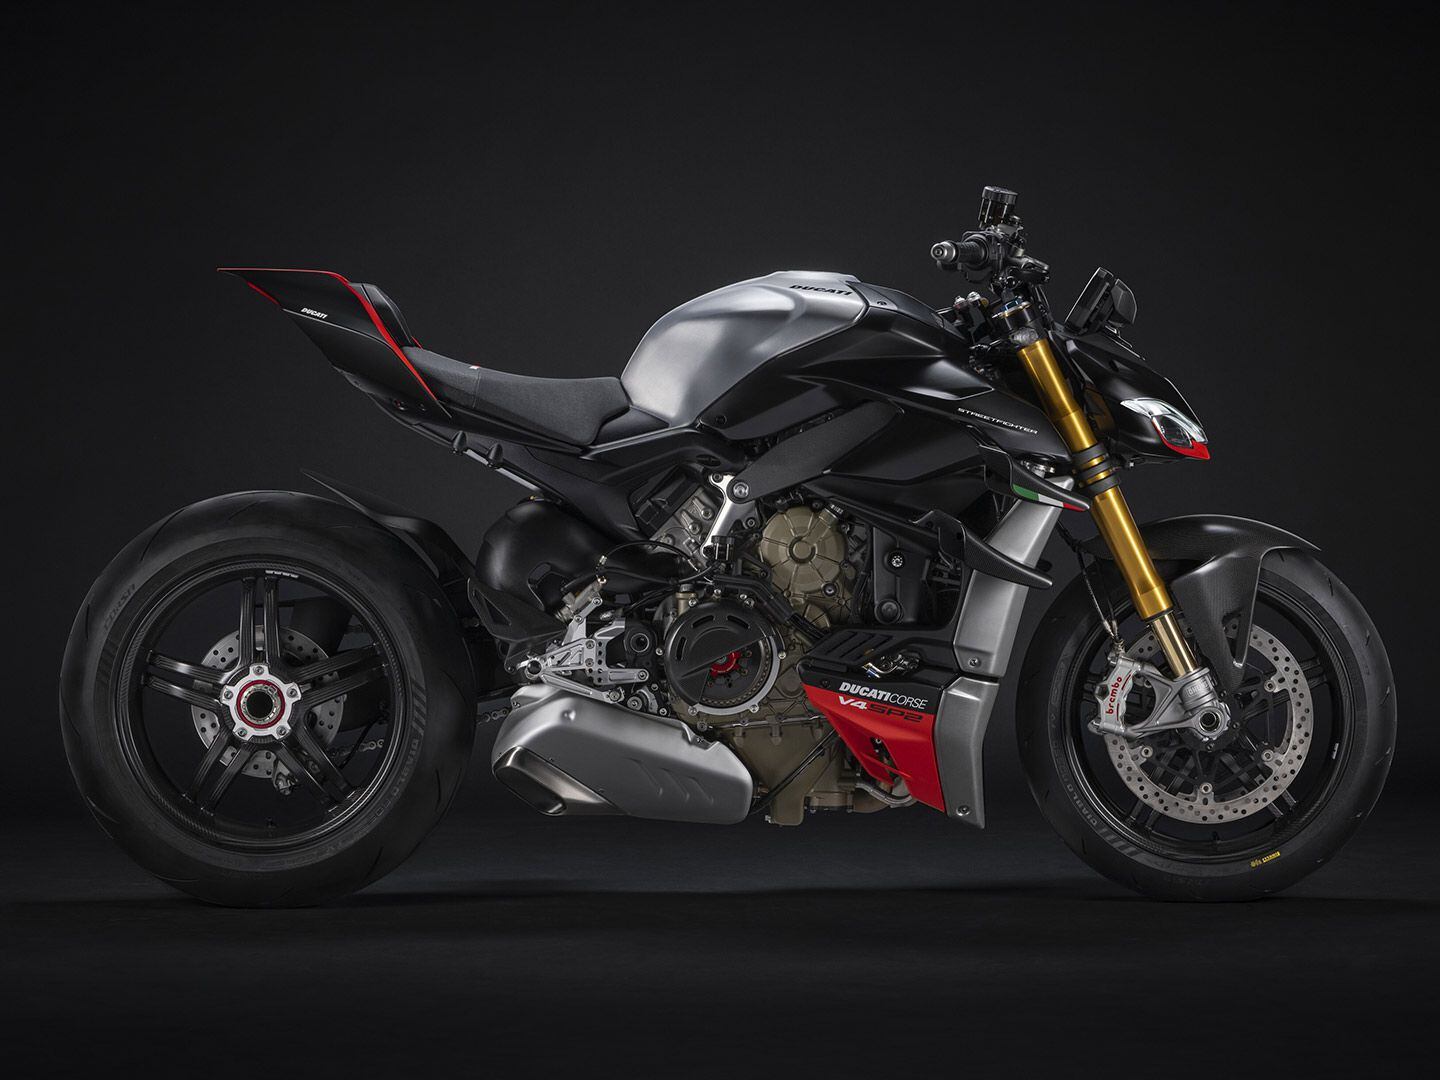 Ducati’s V4 SP2 is an absolute beast on the road or track.